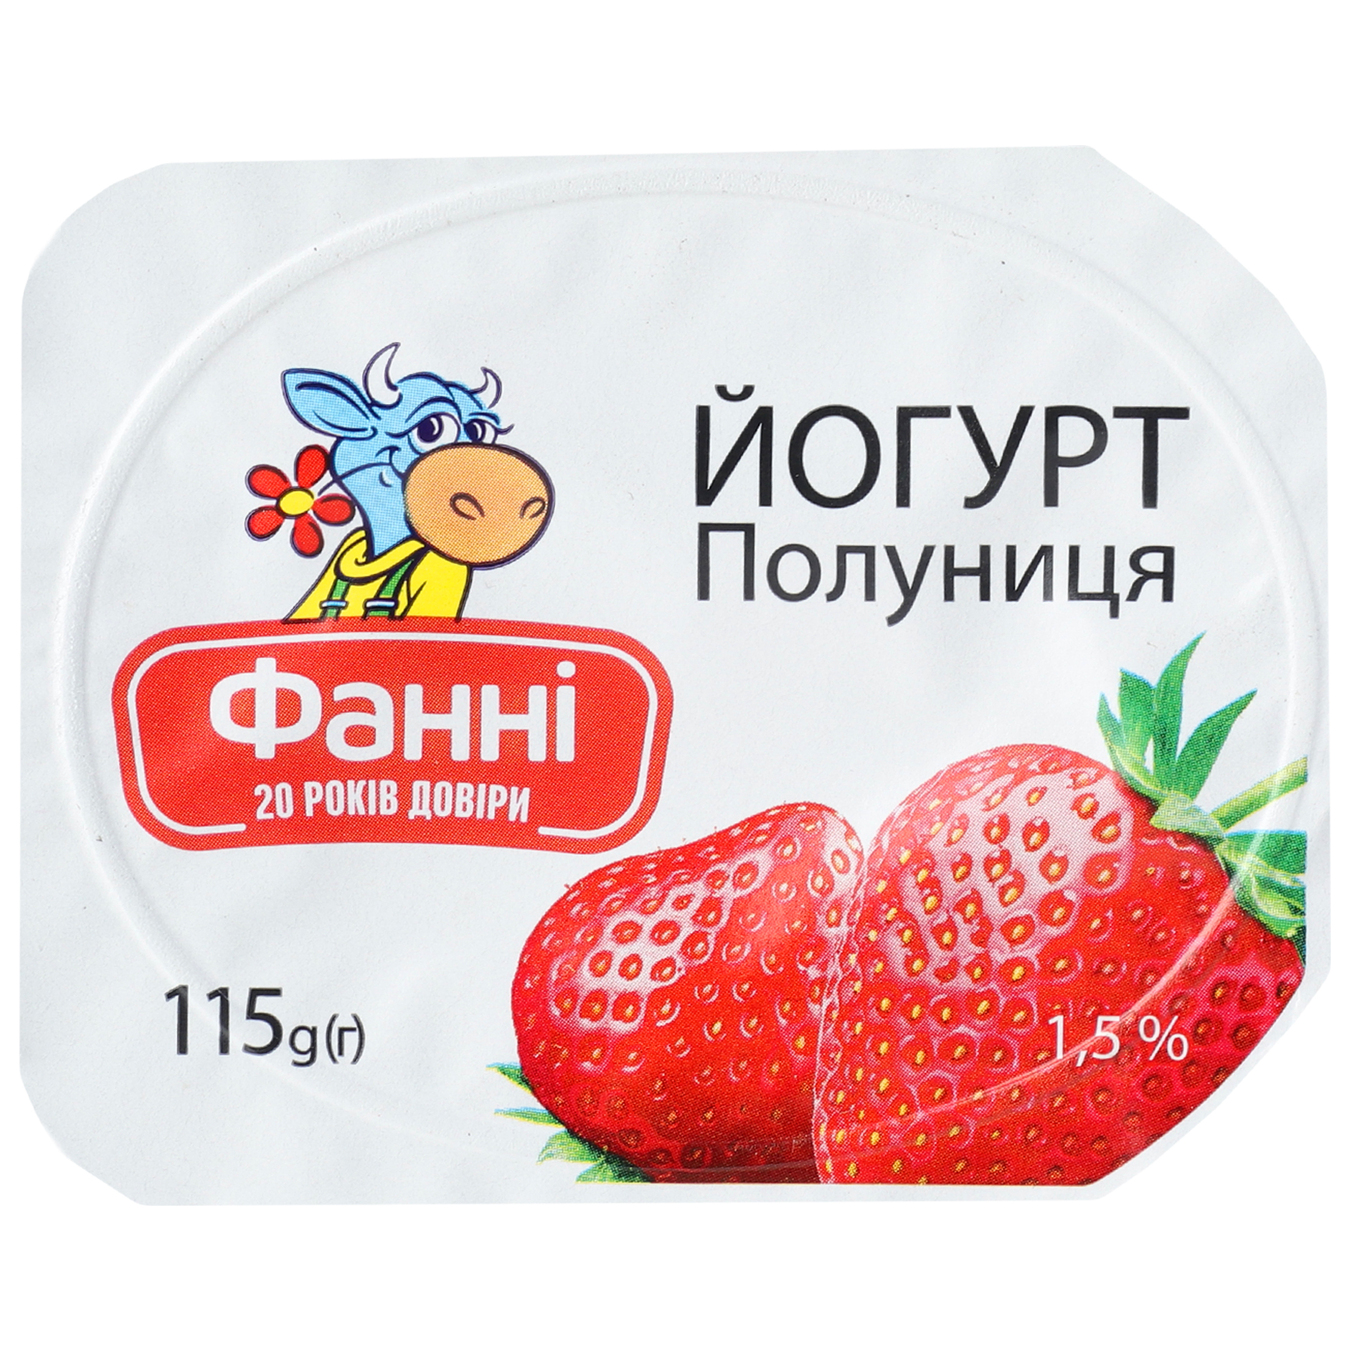 Fanny yogurt with strawberry filling cup 1.5% 115g 2